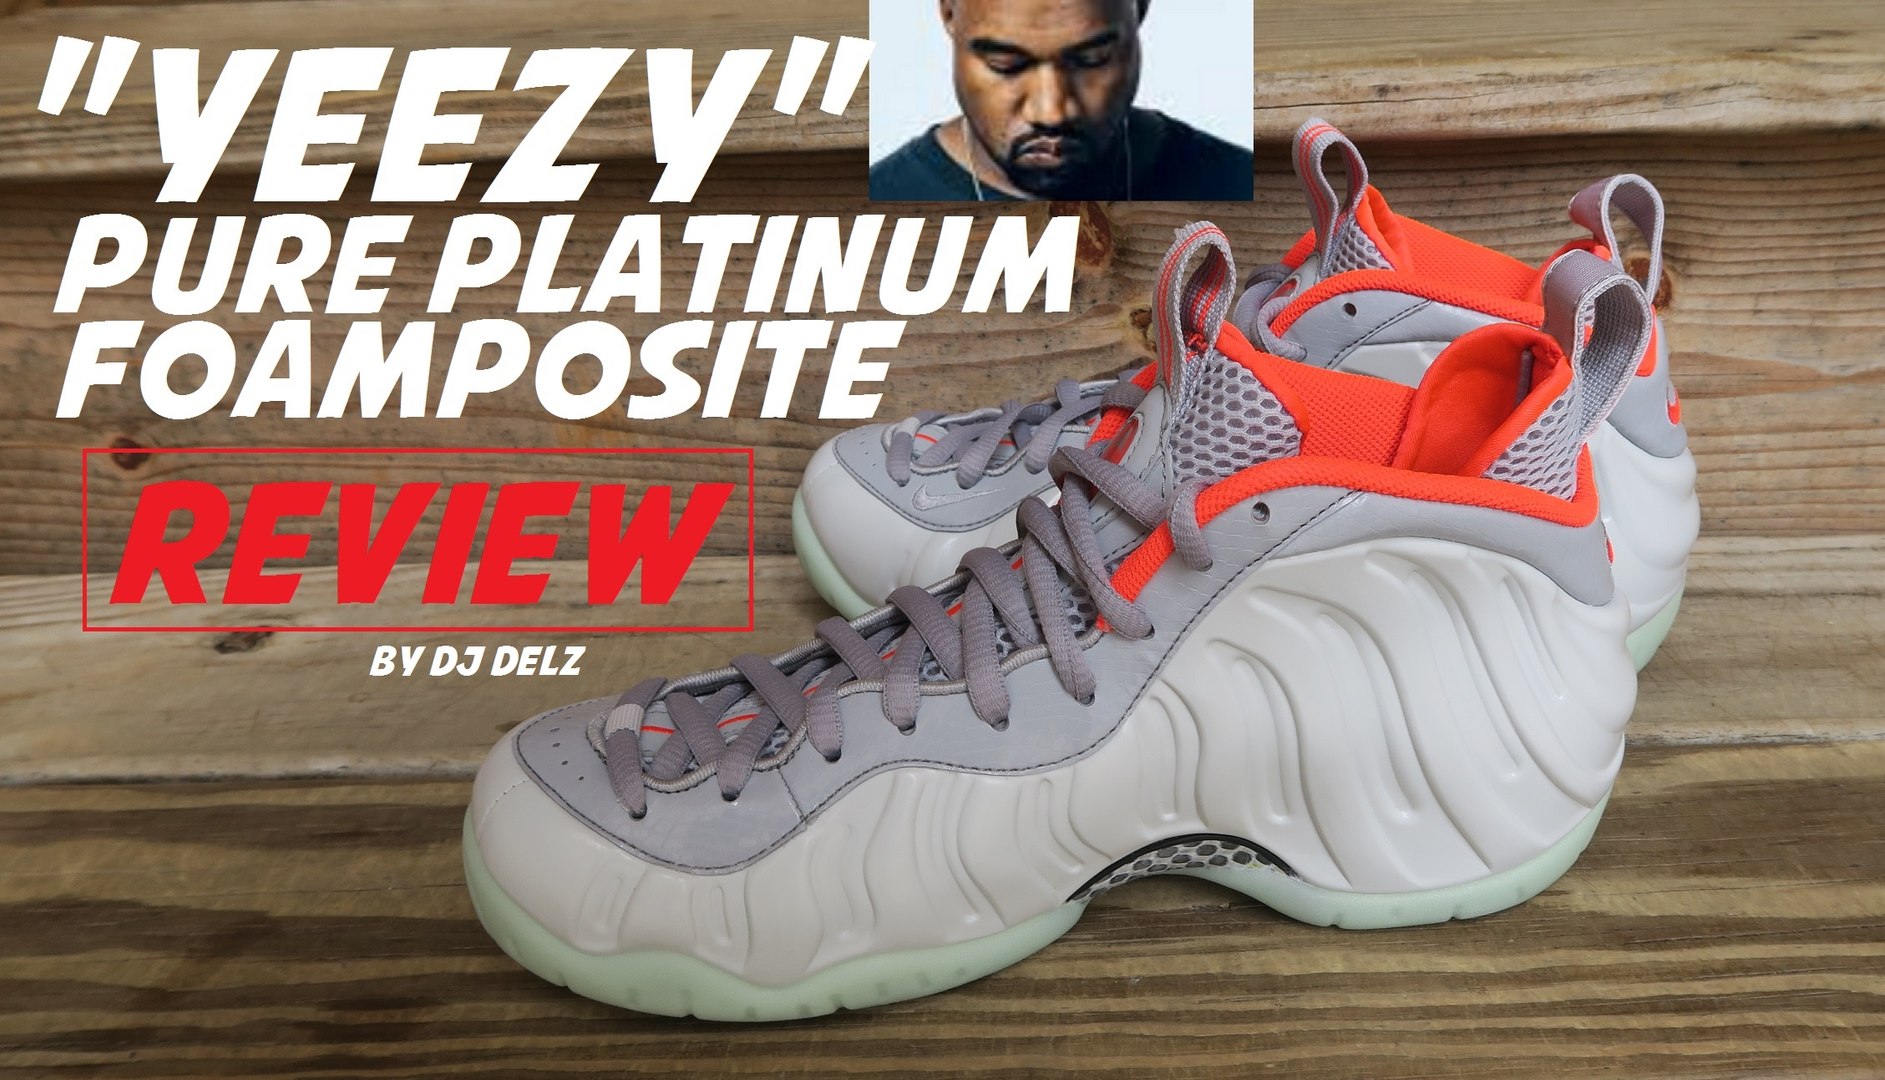 Nike Air Foamposite Pure Platinum Yeezy Sneaker Review With Comparison To  Kanye's Shoe + Glow Test With Dj Delz - video Dailymotion